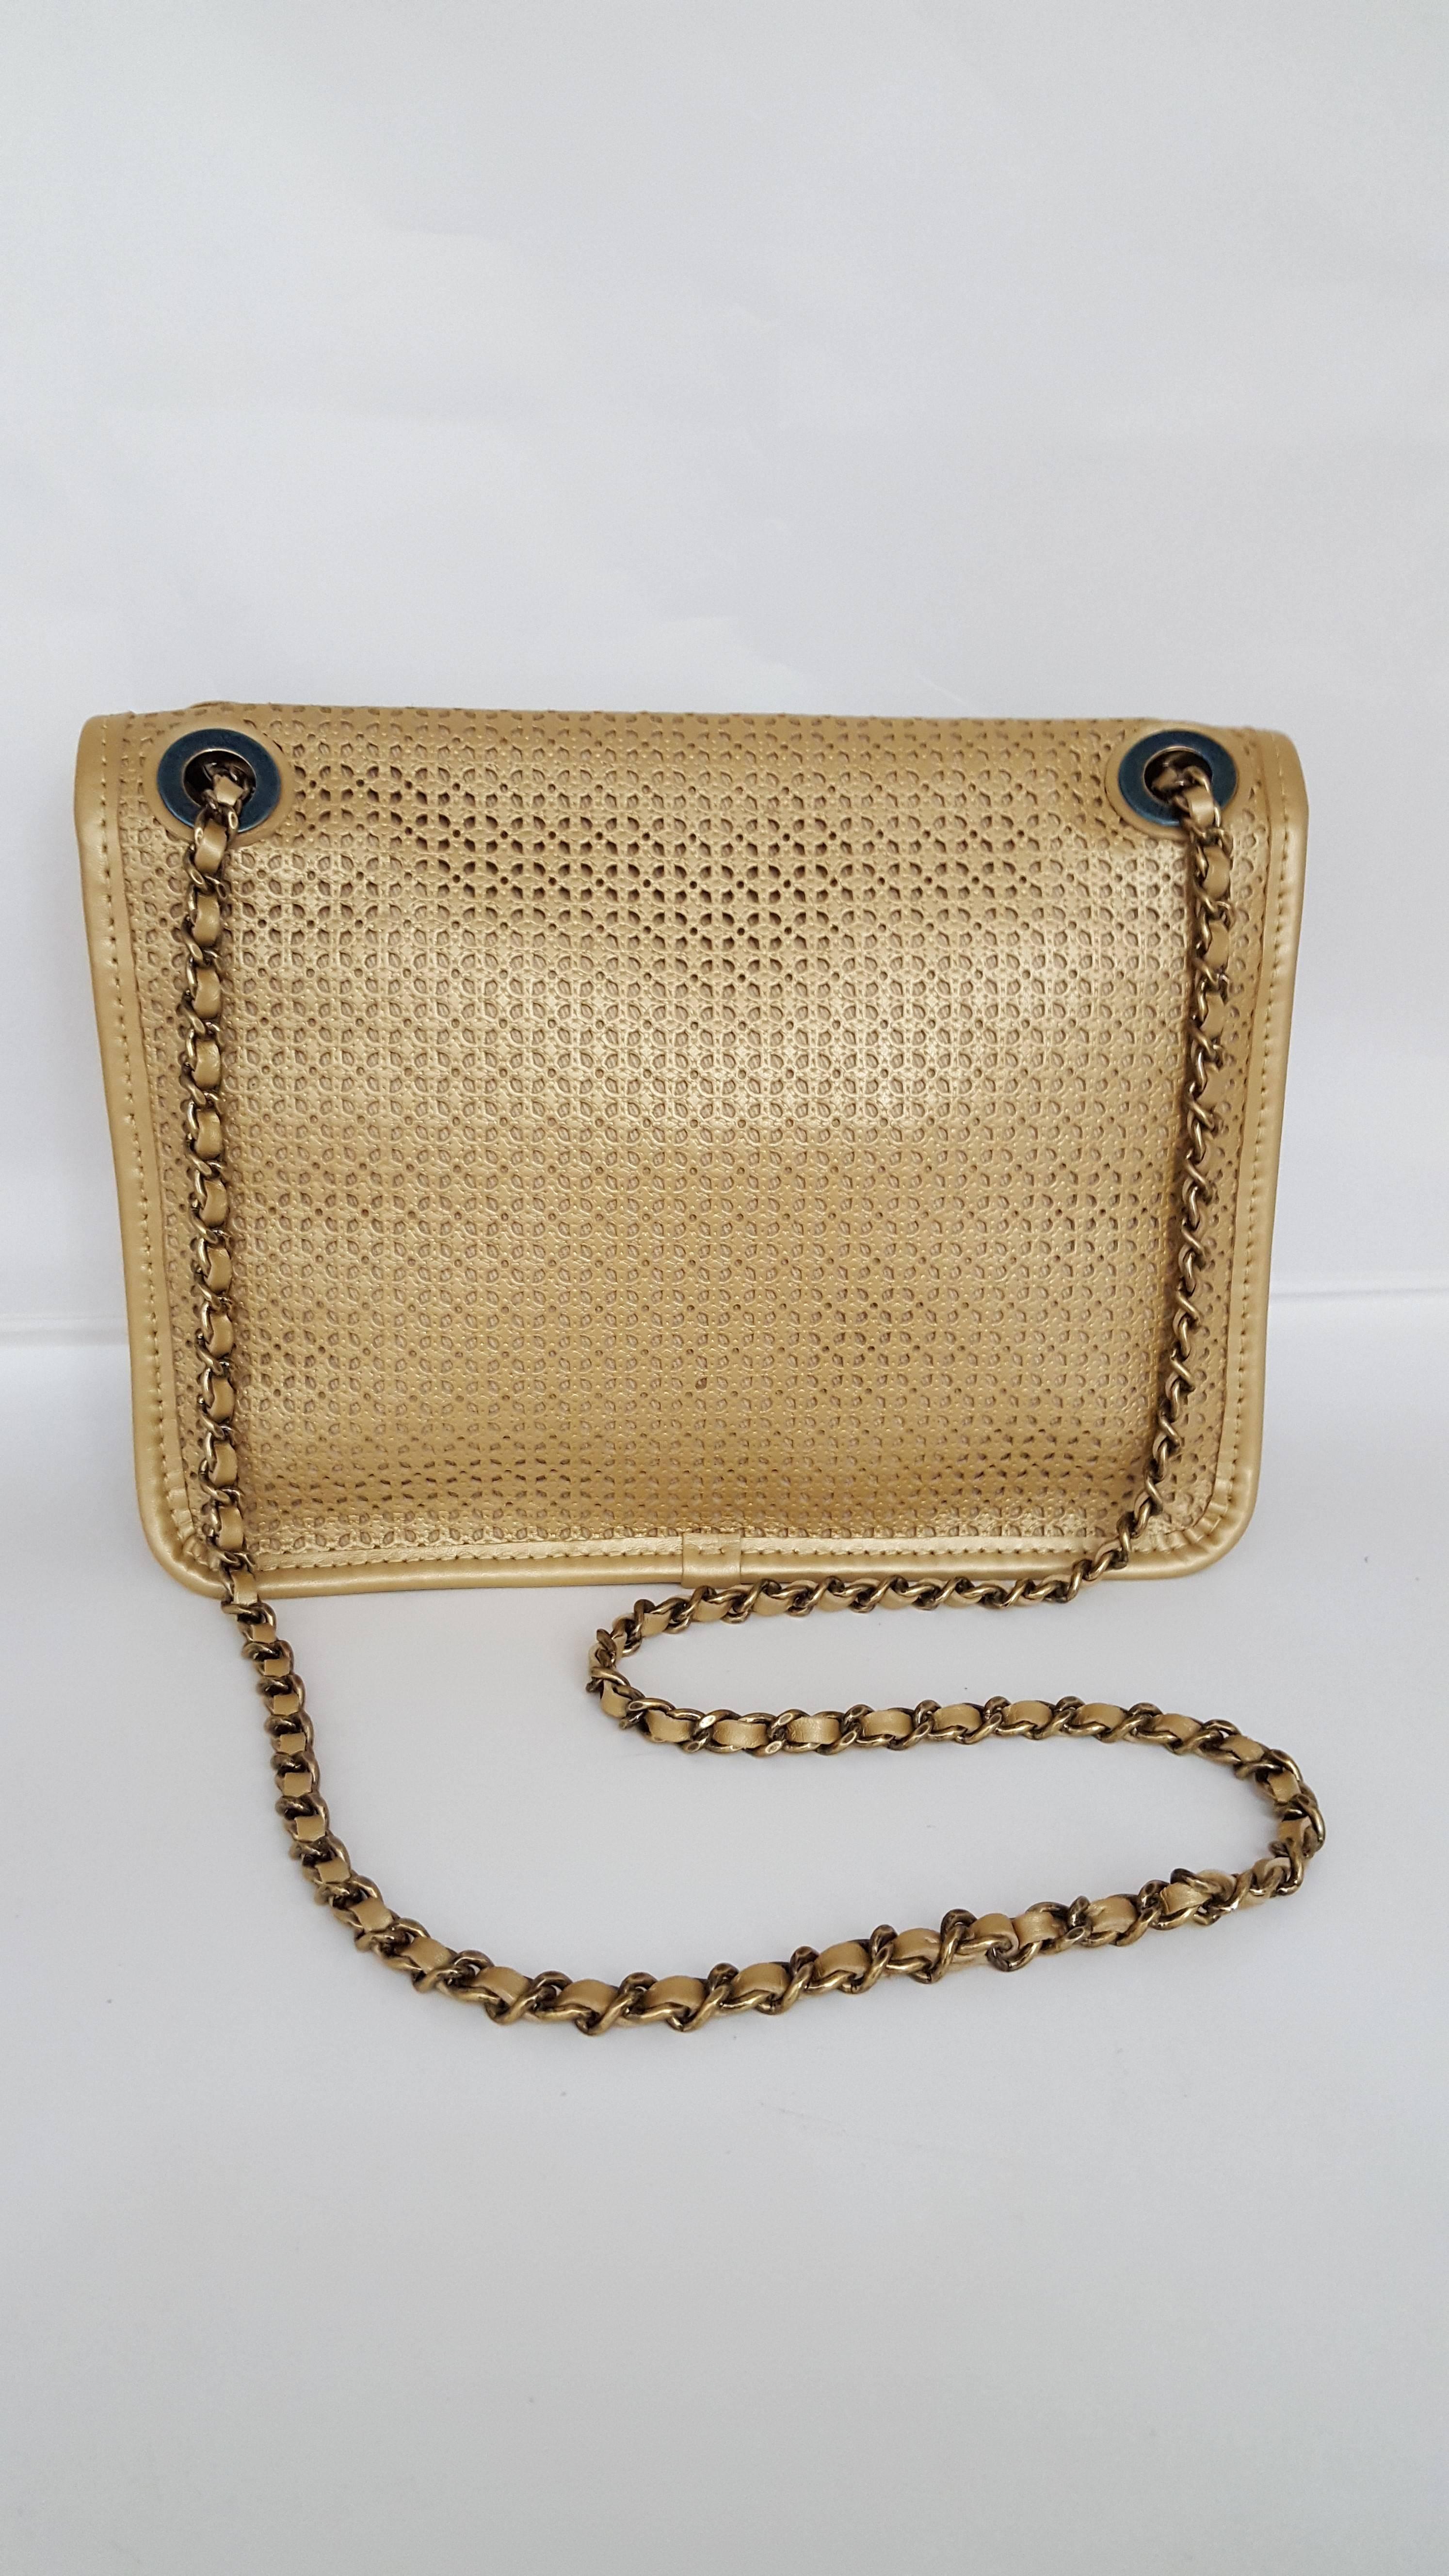 Offered here is a rare Chanel shoulder bag from the Dubai Collection 2015 and was never used.   The beautiful metallic beige color with the antiqued gold hardware is stunning.  On the shoulder chain is a double sided medallion.  One side is CC and